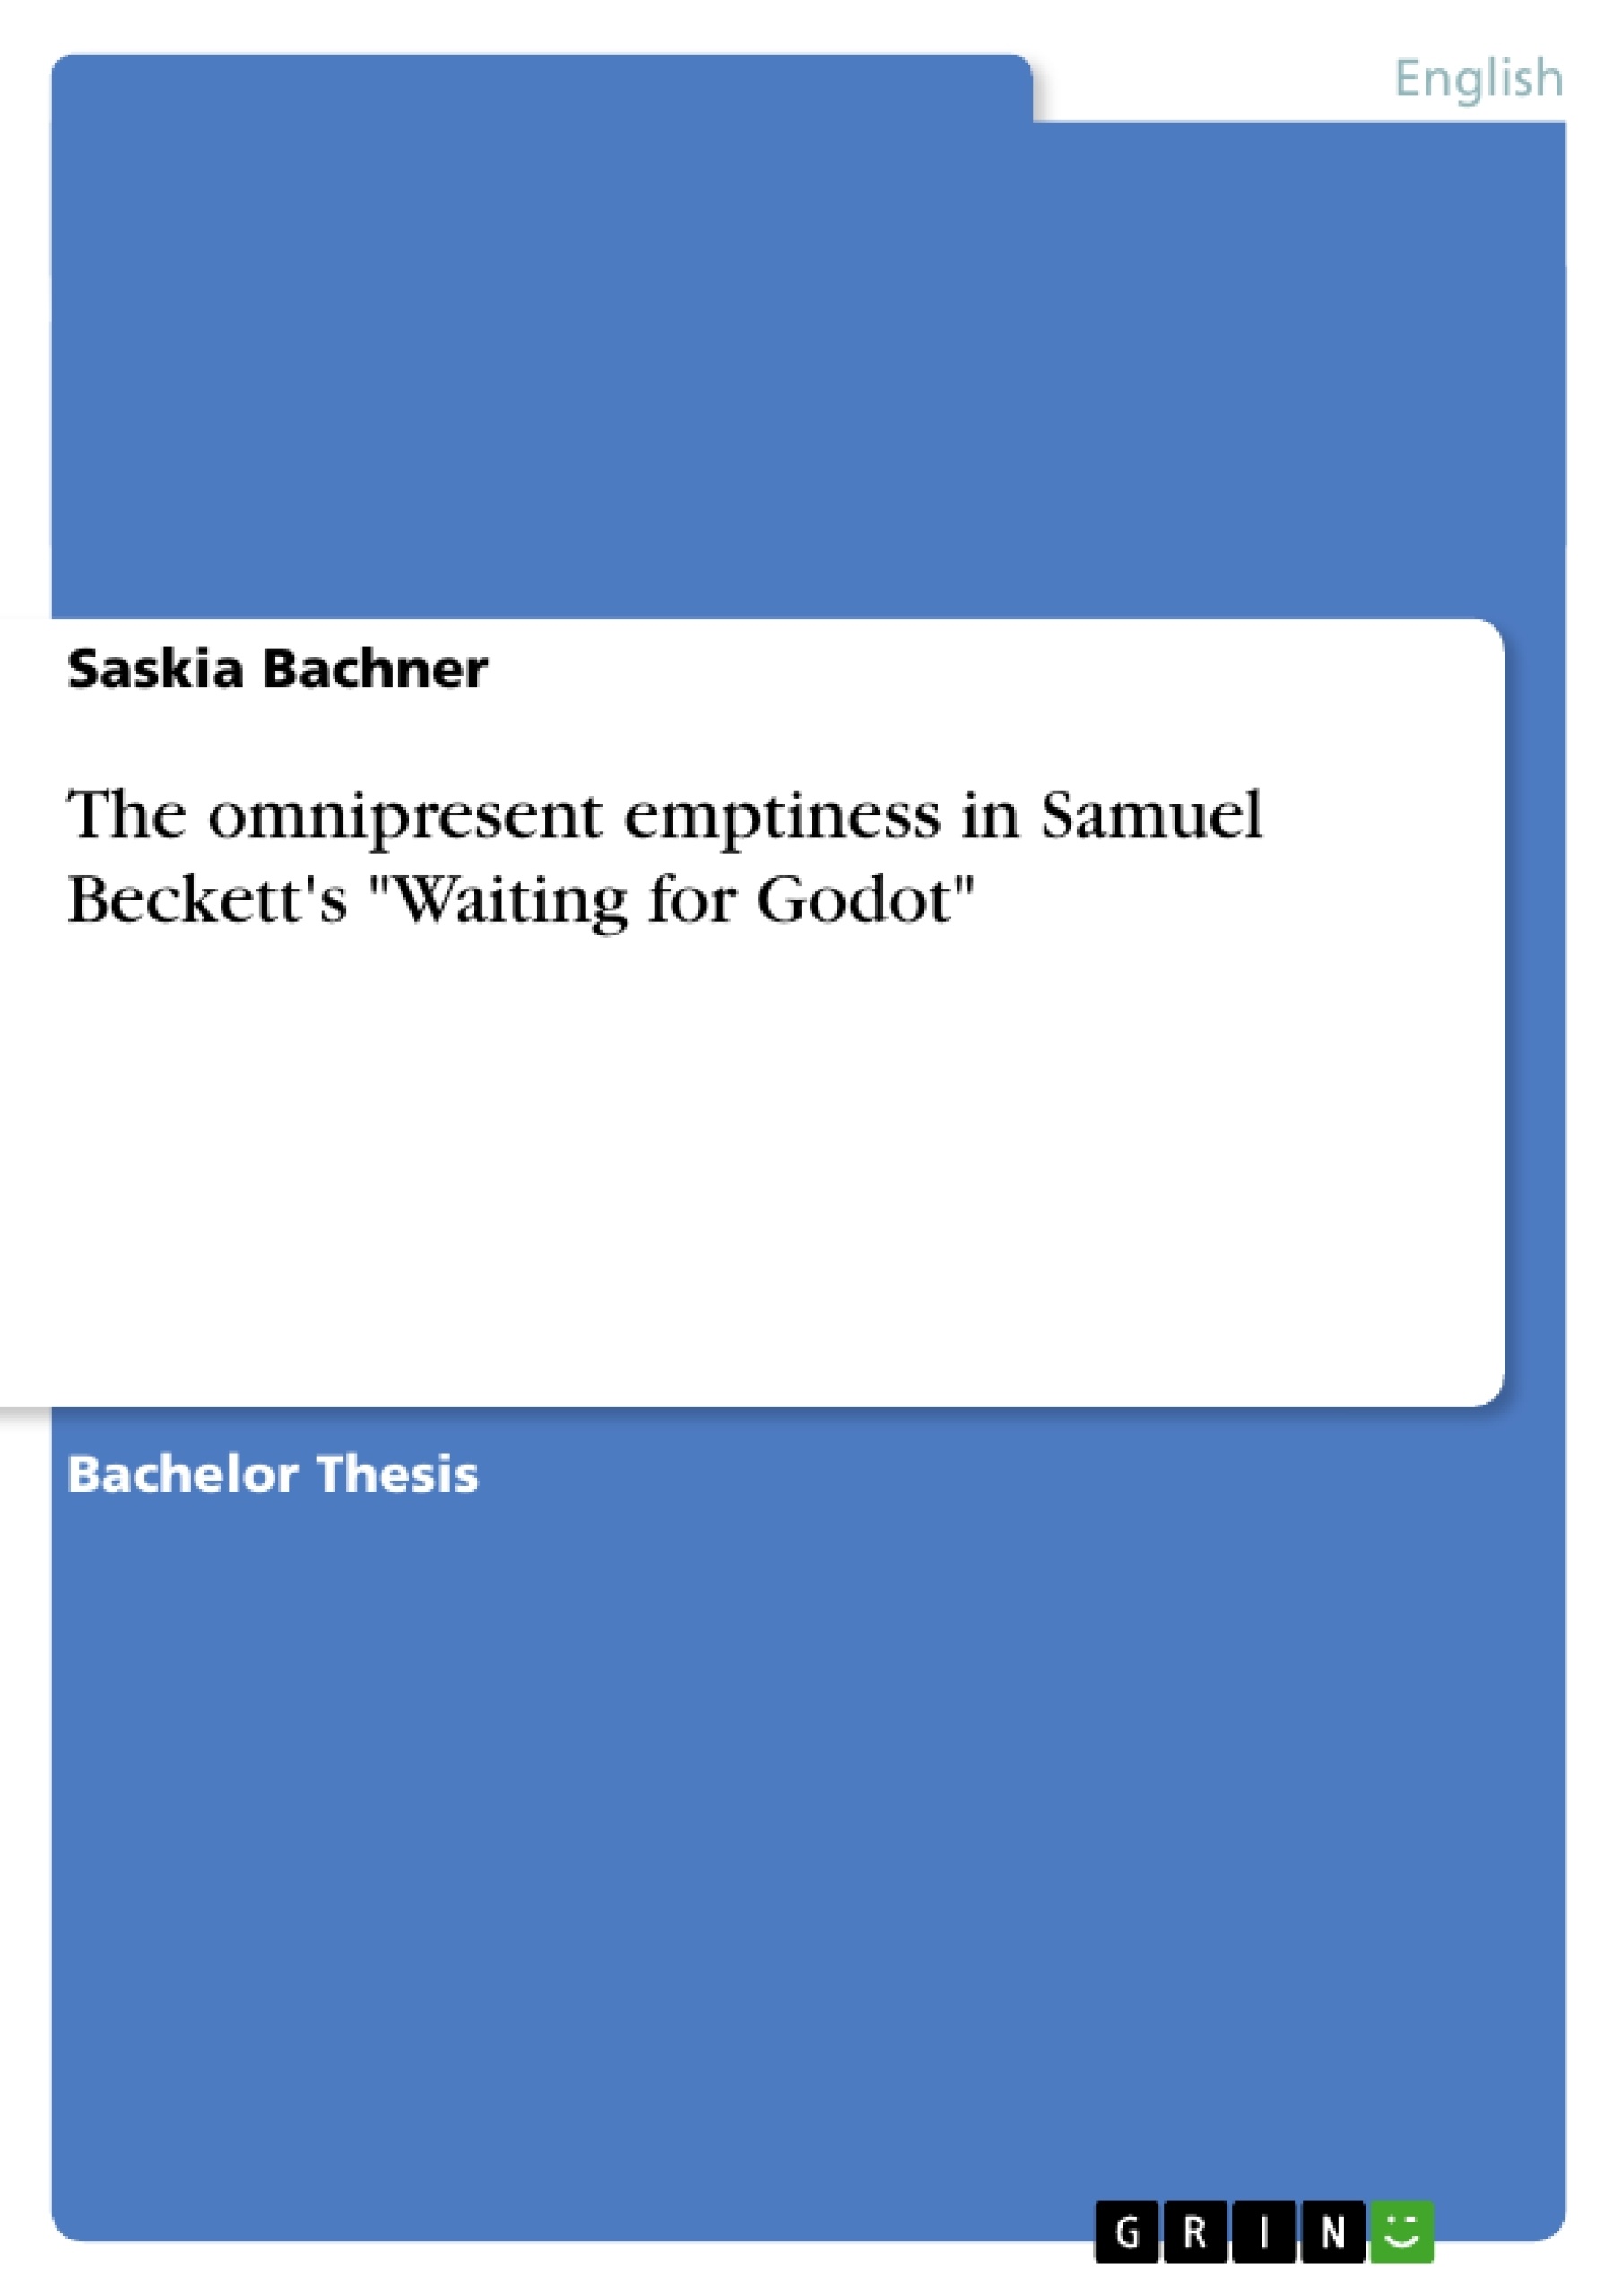 Title: The omnipresent emptiness in Samuel Beckett's "Waiting for Godot"